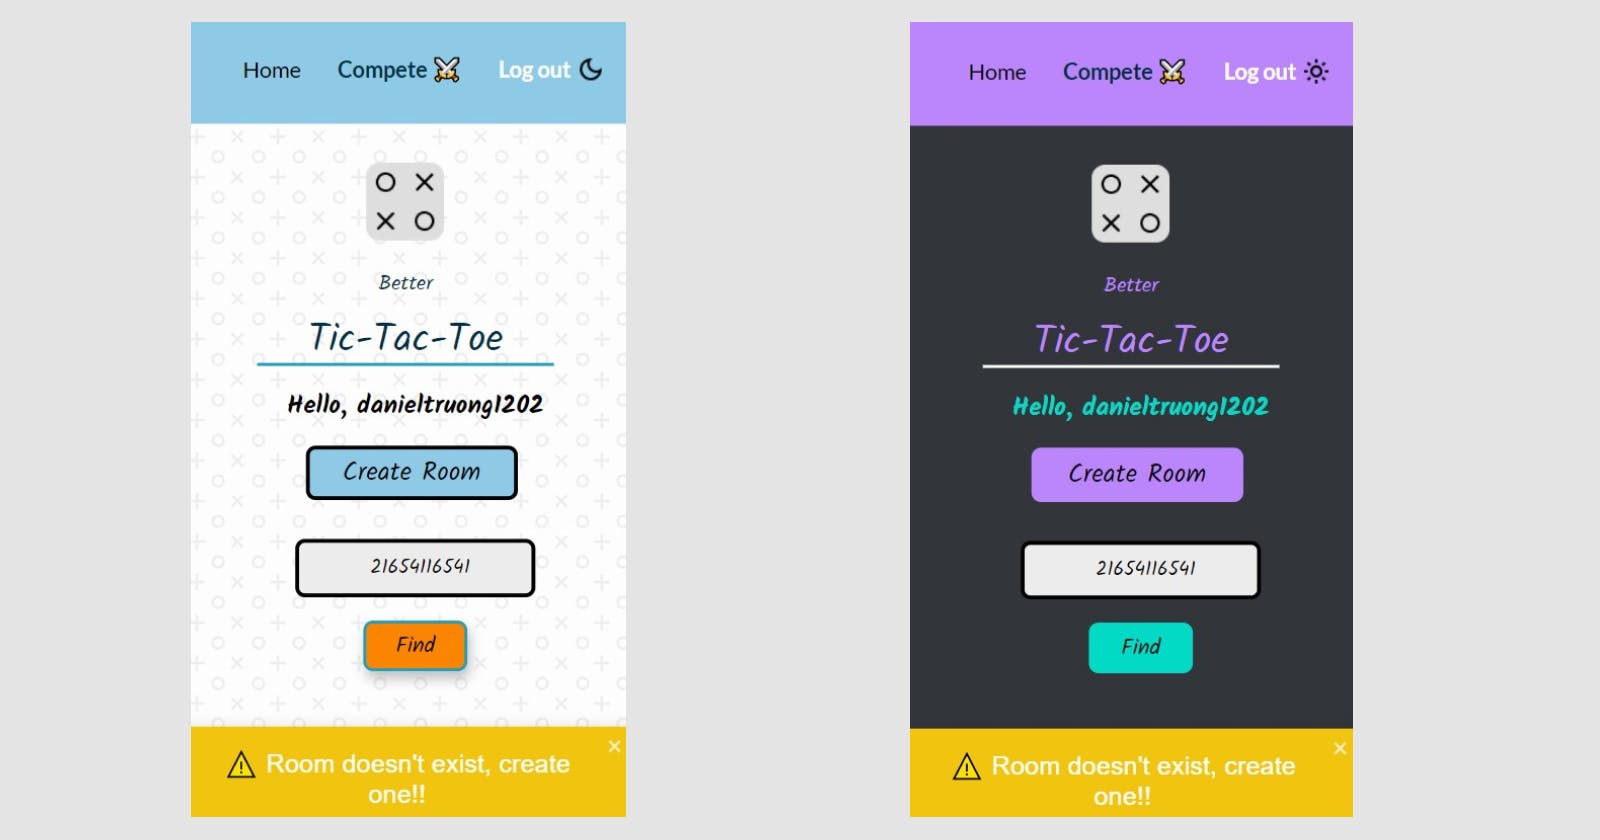 Full Socket.io and React.js Online Multiplayer Tic-Tac-Toe Game